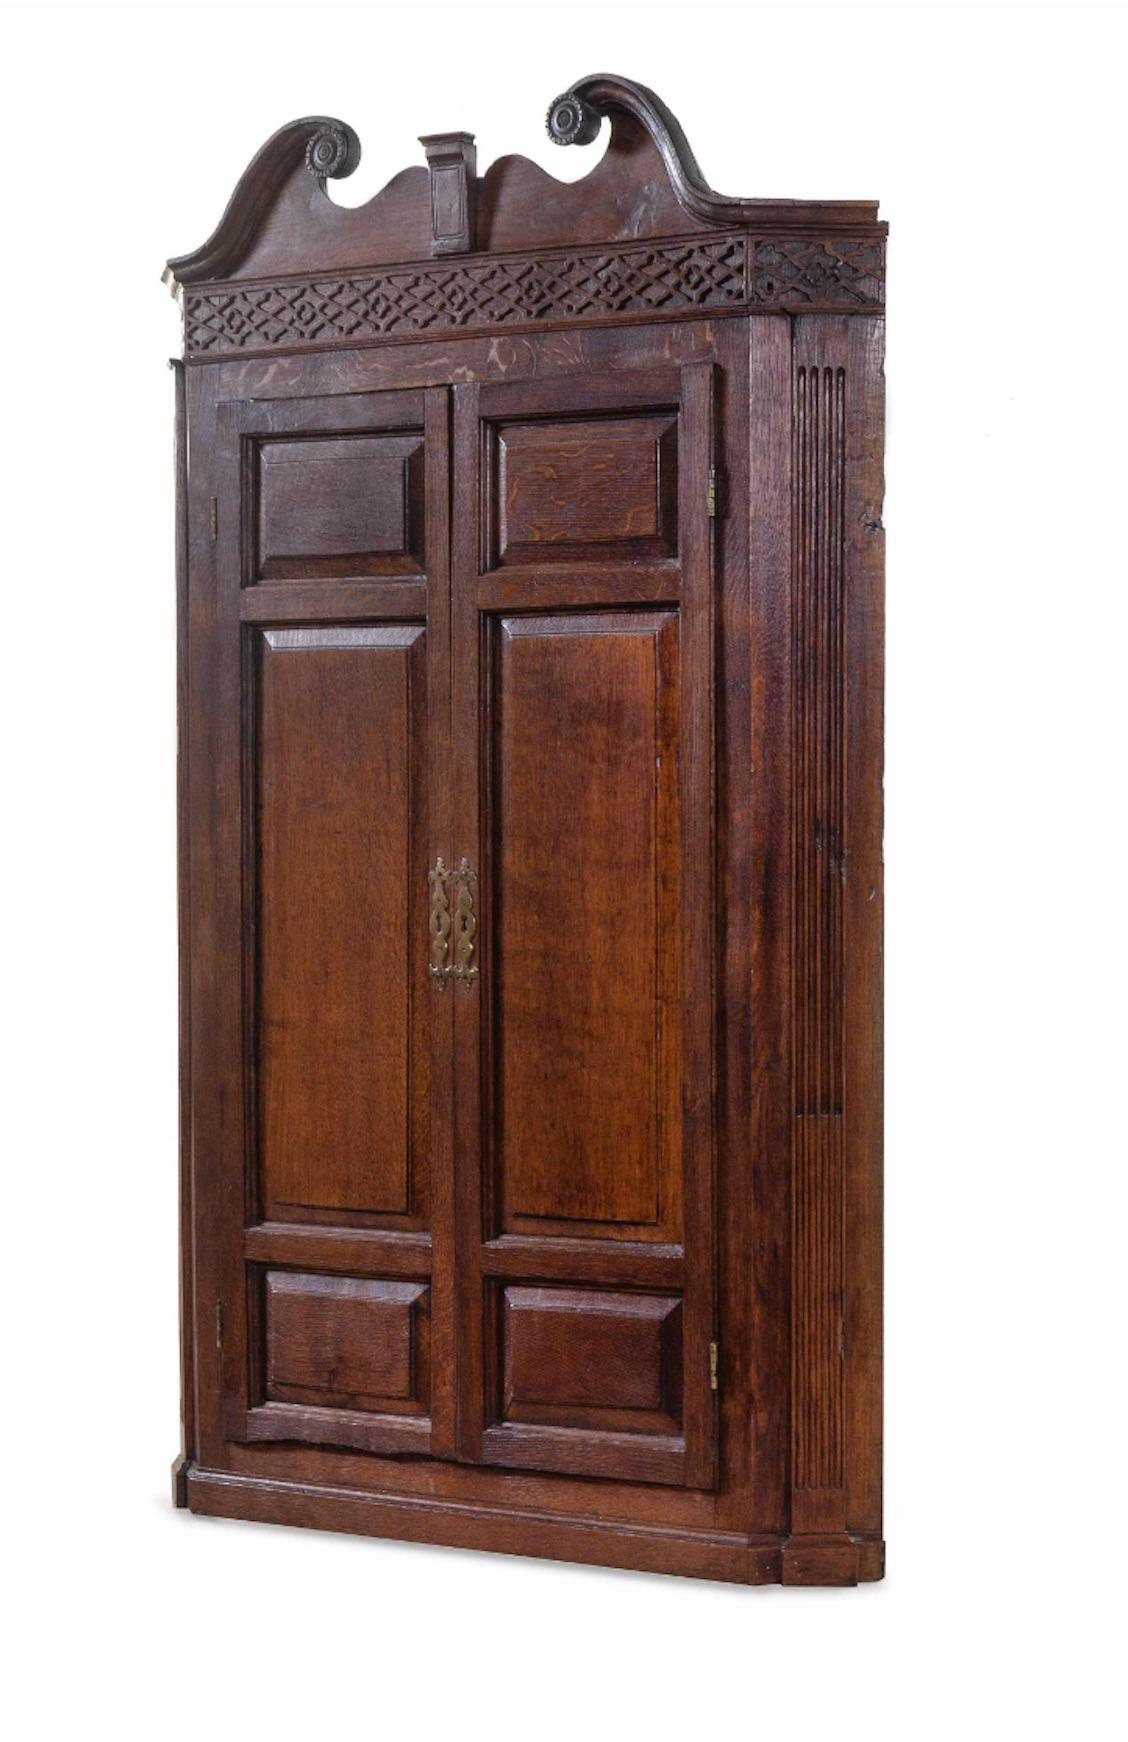 George III Oak Hanging Corner Cabinet, Great Scale, Color and Proportions In Excellent Condition For Sale In Buchanan, MI